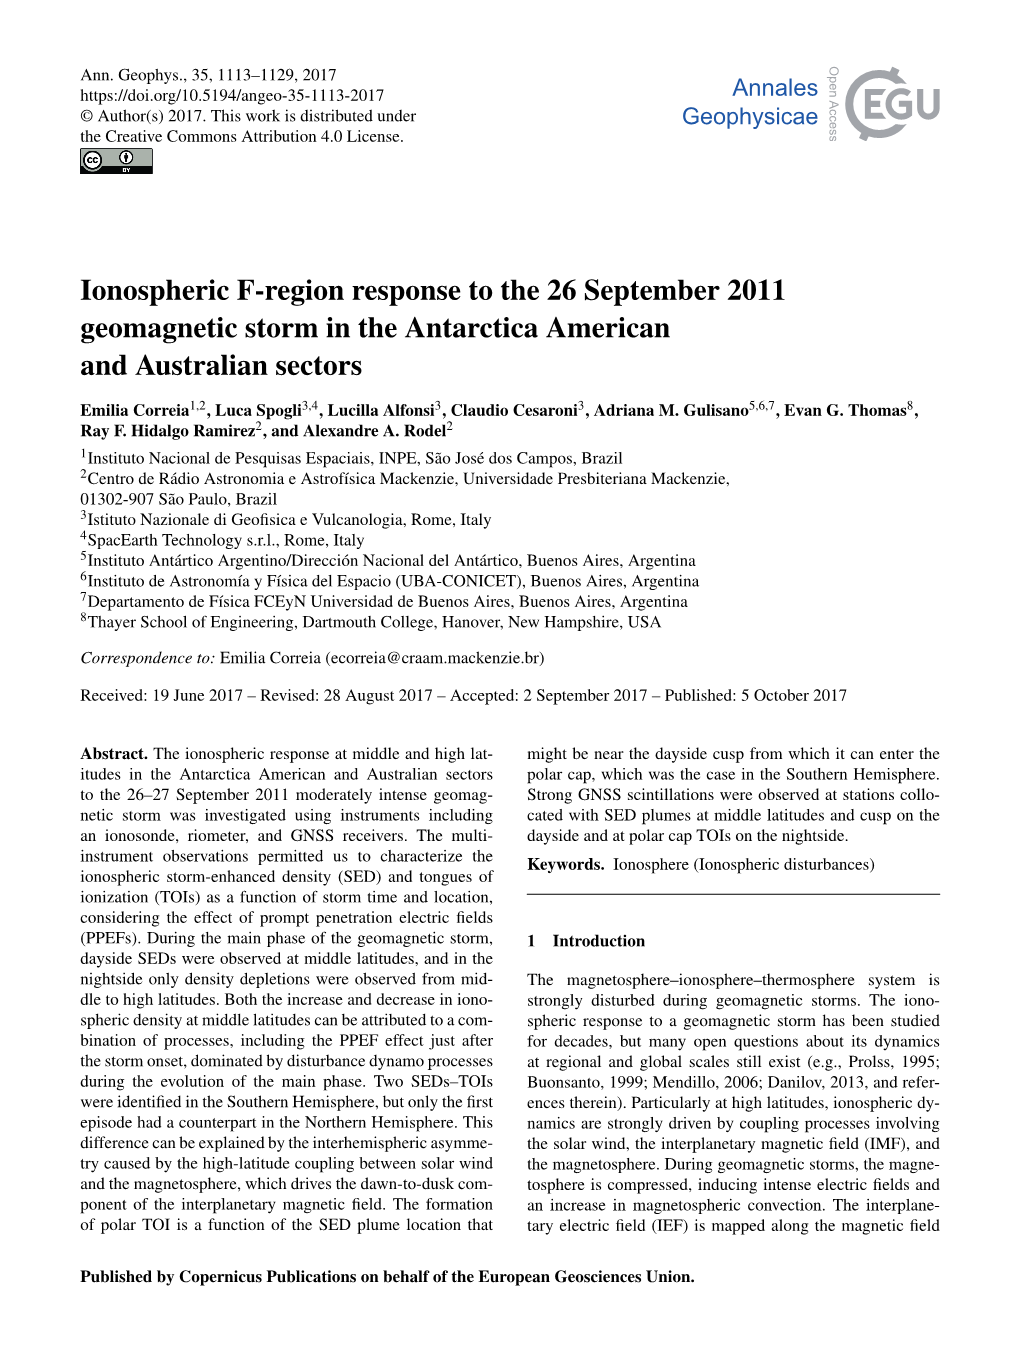 Ionospheric F-Region Response to the 26 September 2011 Geomagnetic Storm in the Antarctica American and Australian Sectors